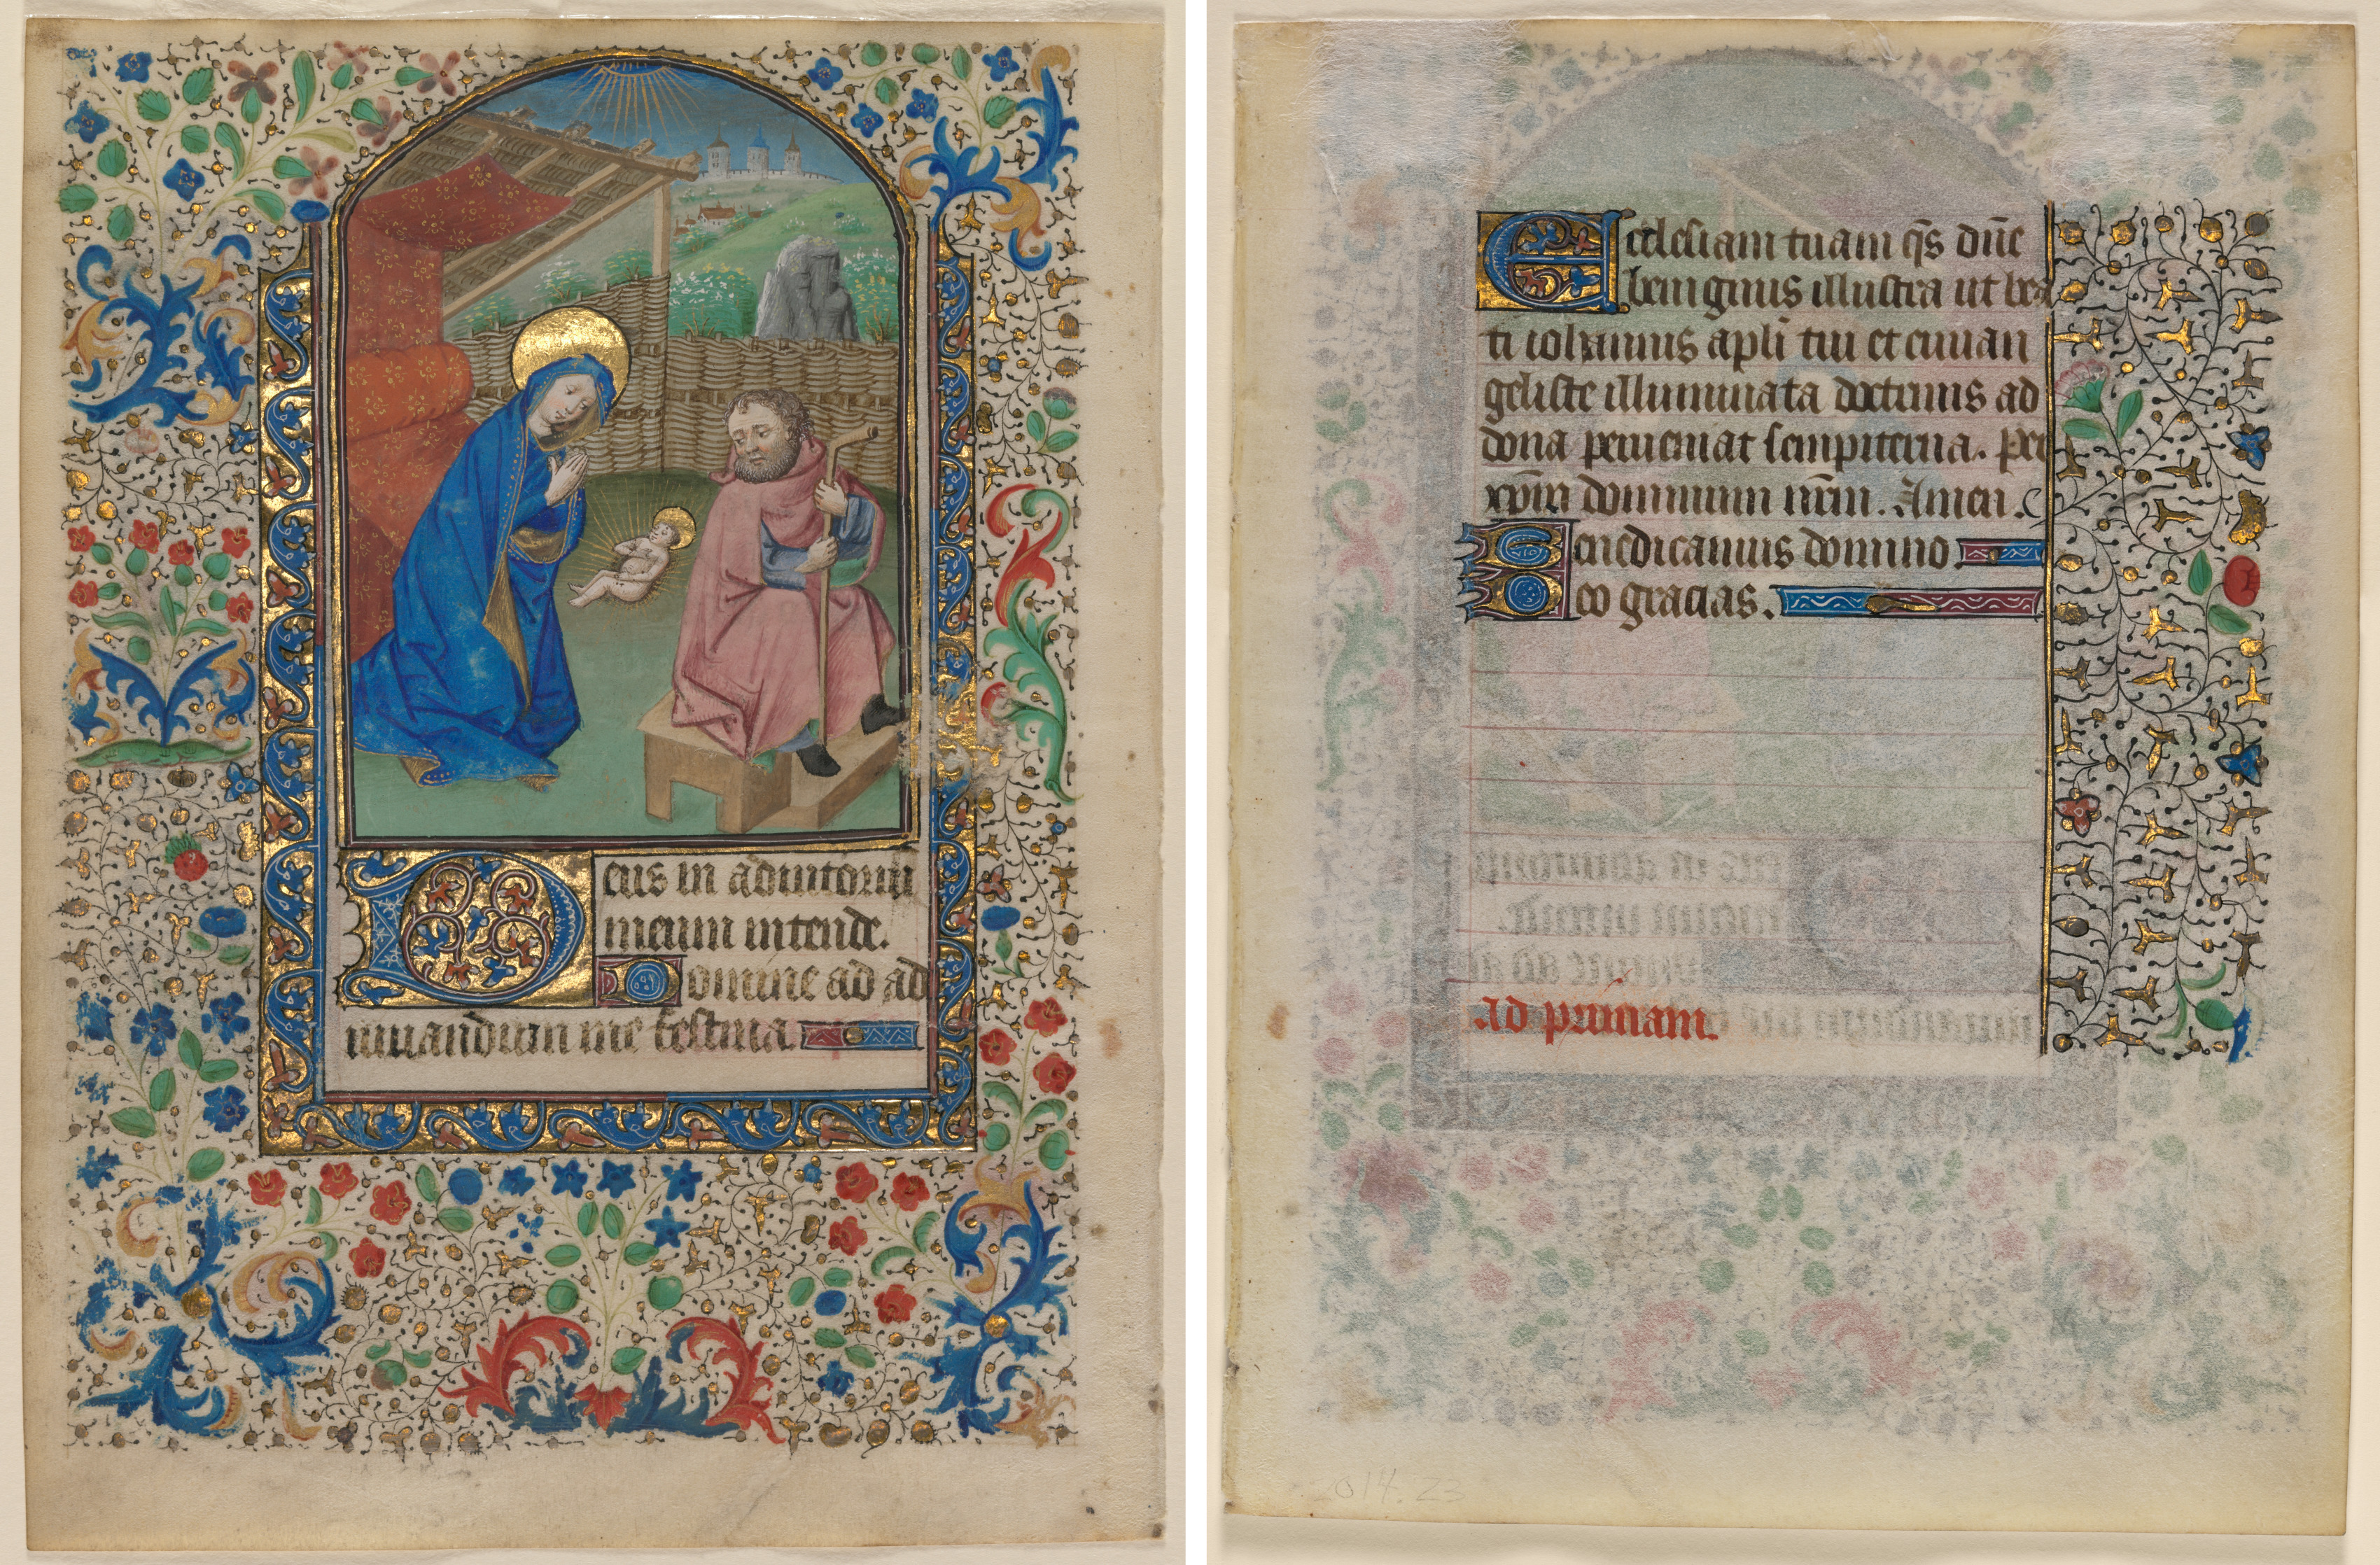 Leaf from a Book of Hours: The Nativity (recto) and Text (verso)